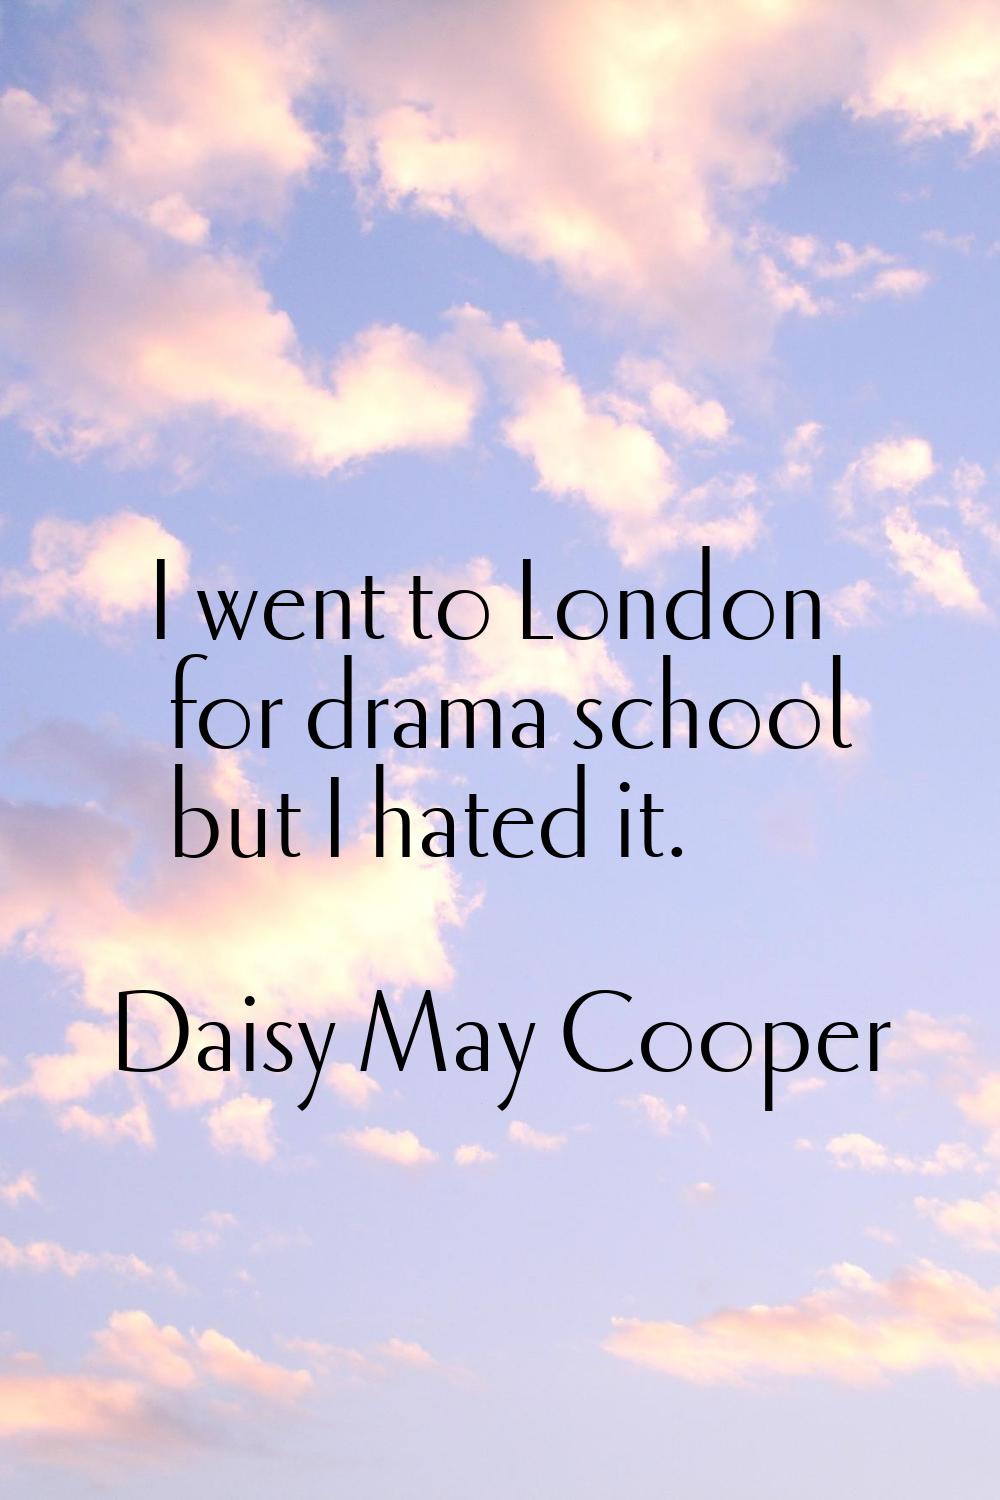 I went to London for drama school but I hated it.